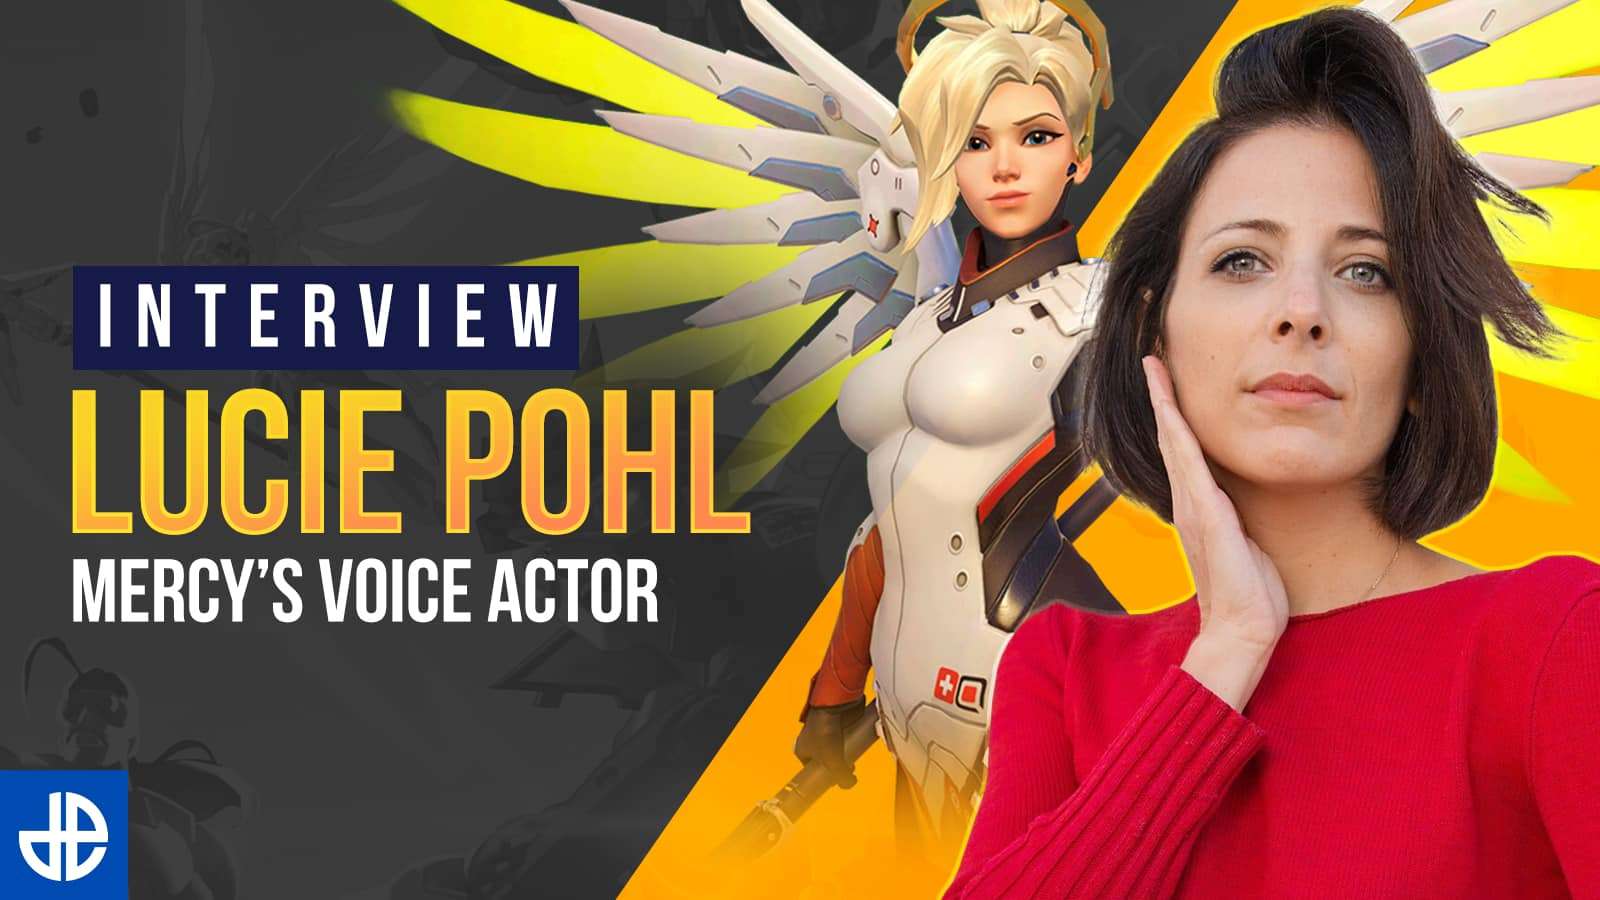 Lucie Pohl Mercy voice actor interview